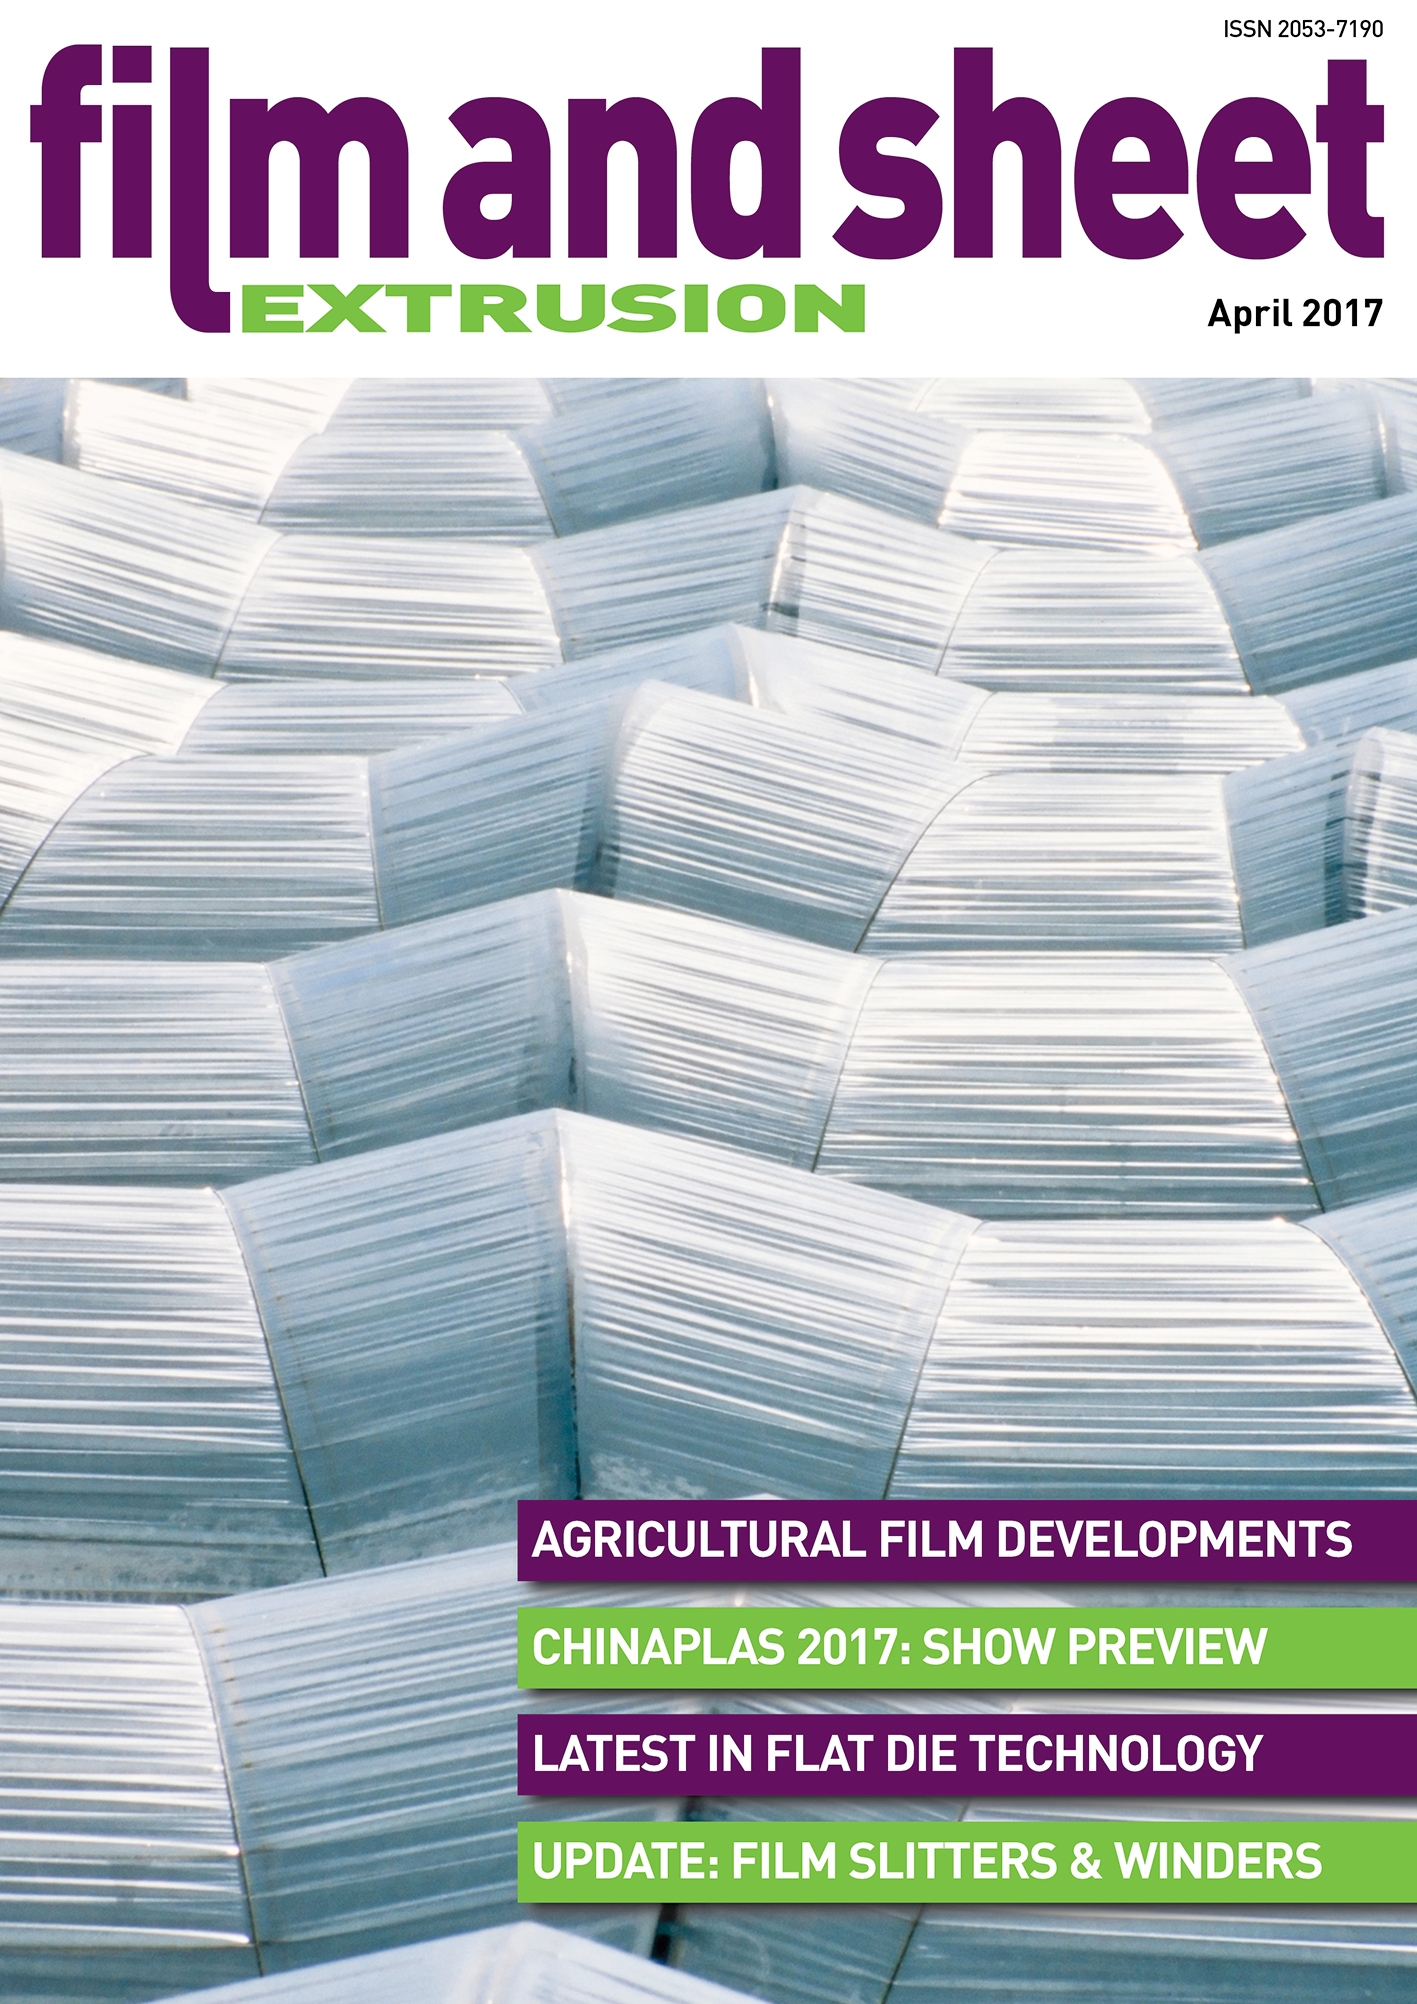 Film and Sheet Extrusion April 2017